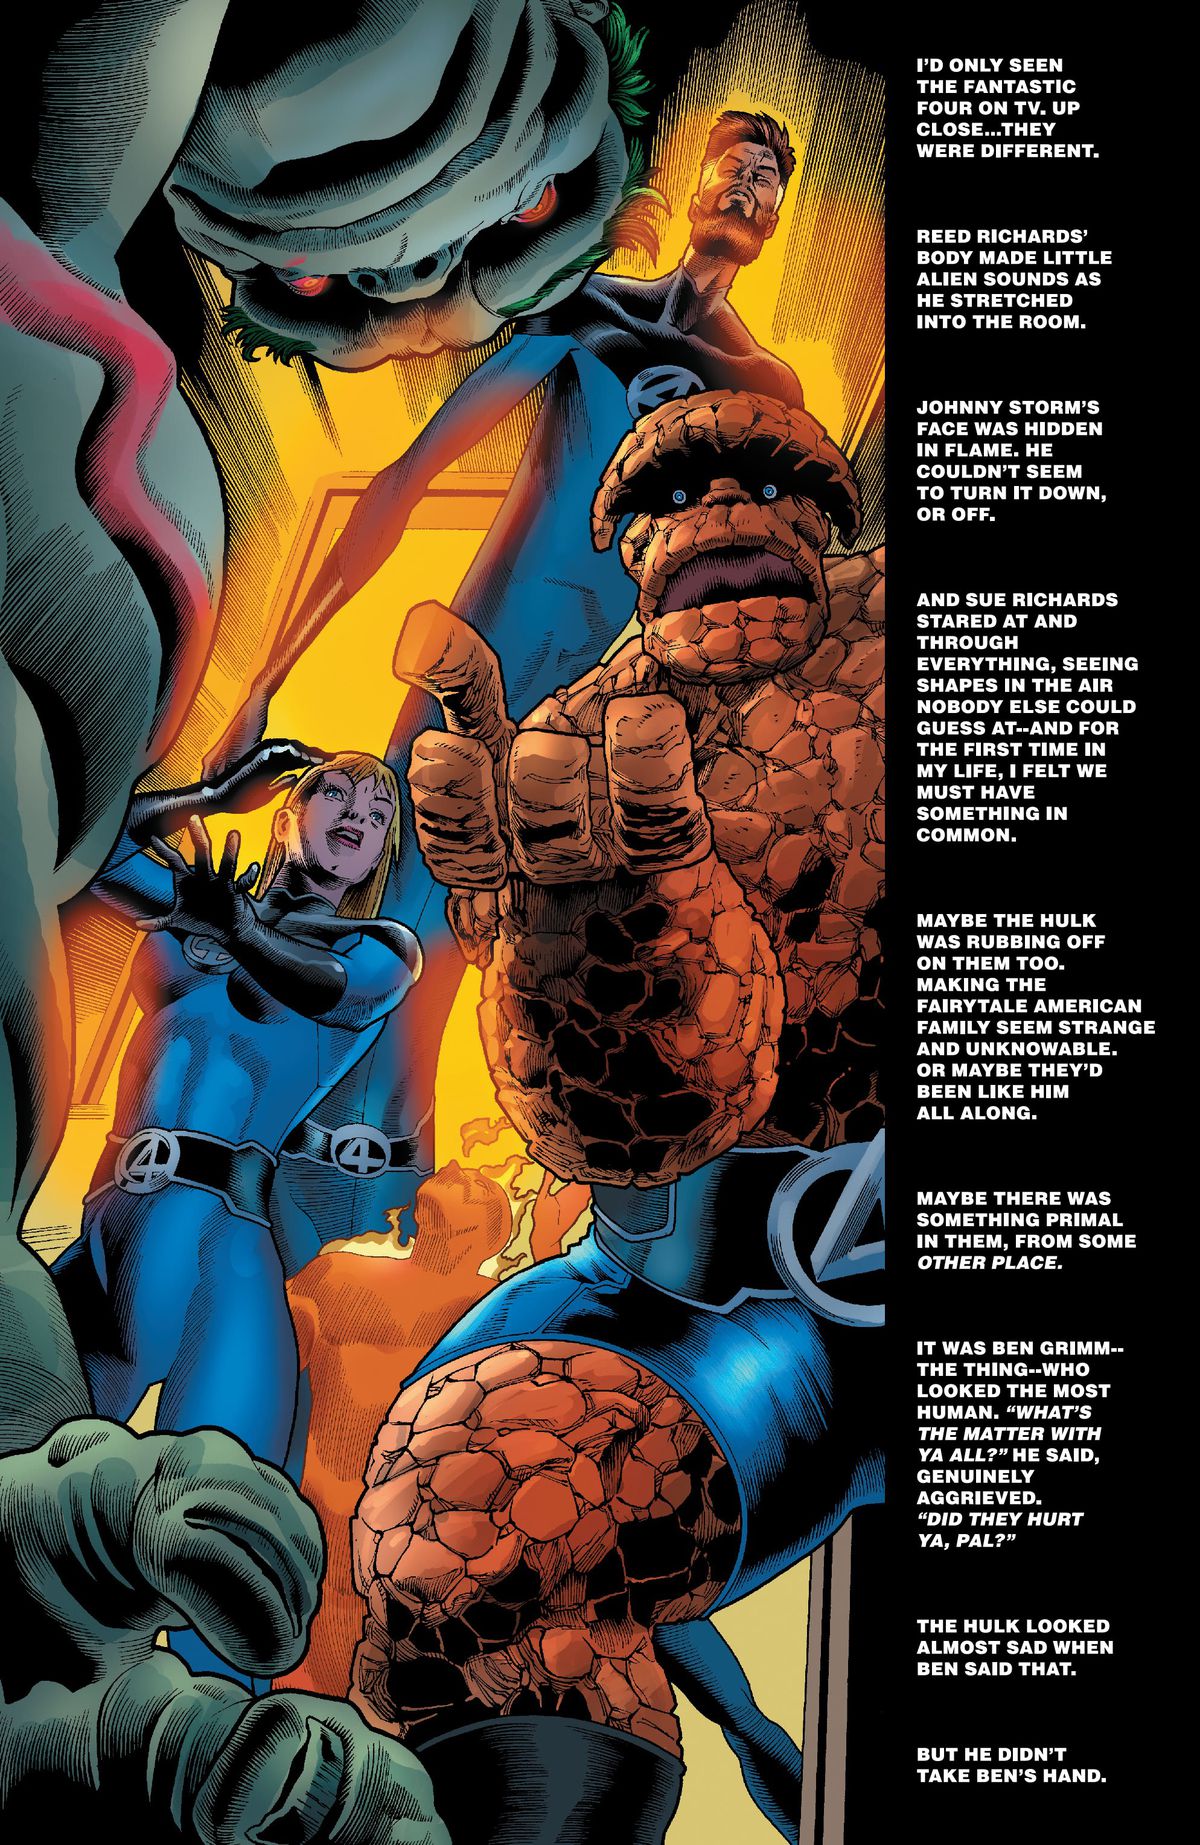 The Fantastic Four step through a glowing door and the Thing holds out a hand to the stricken Hulk, saying “Did they hurt ya, pal?” Words on the right describe their unearthly appearance in Immortal Hulk #49 (2021). 